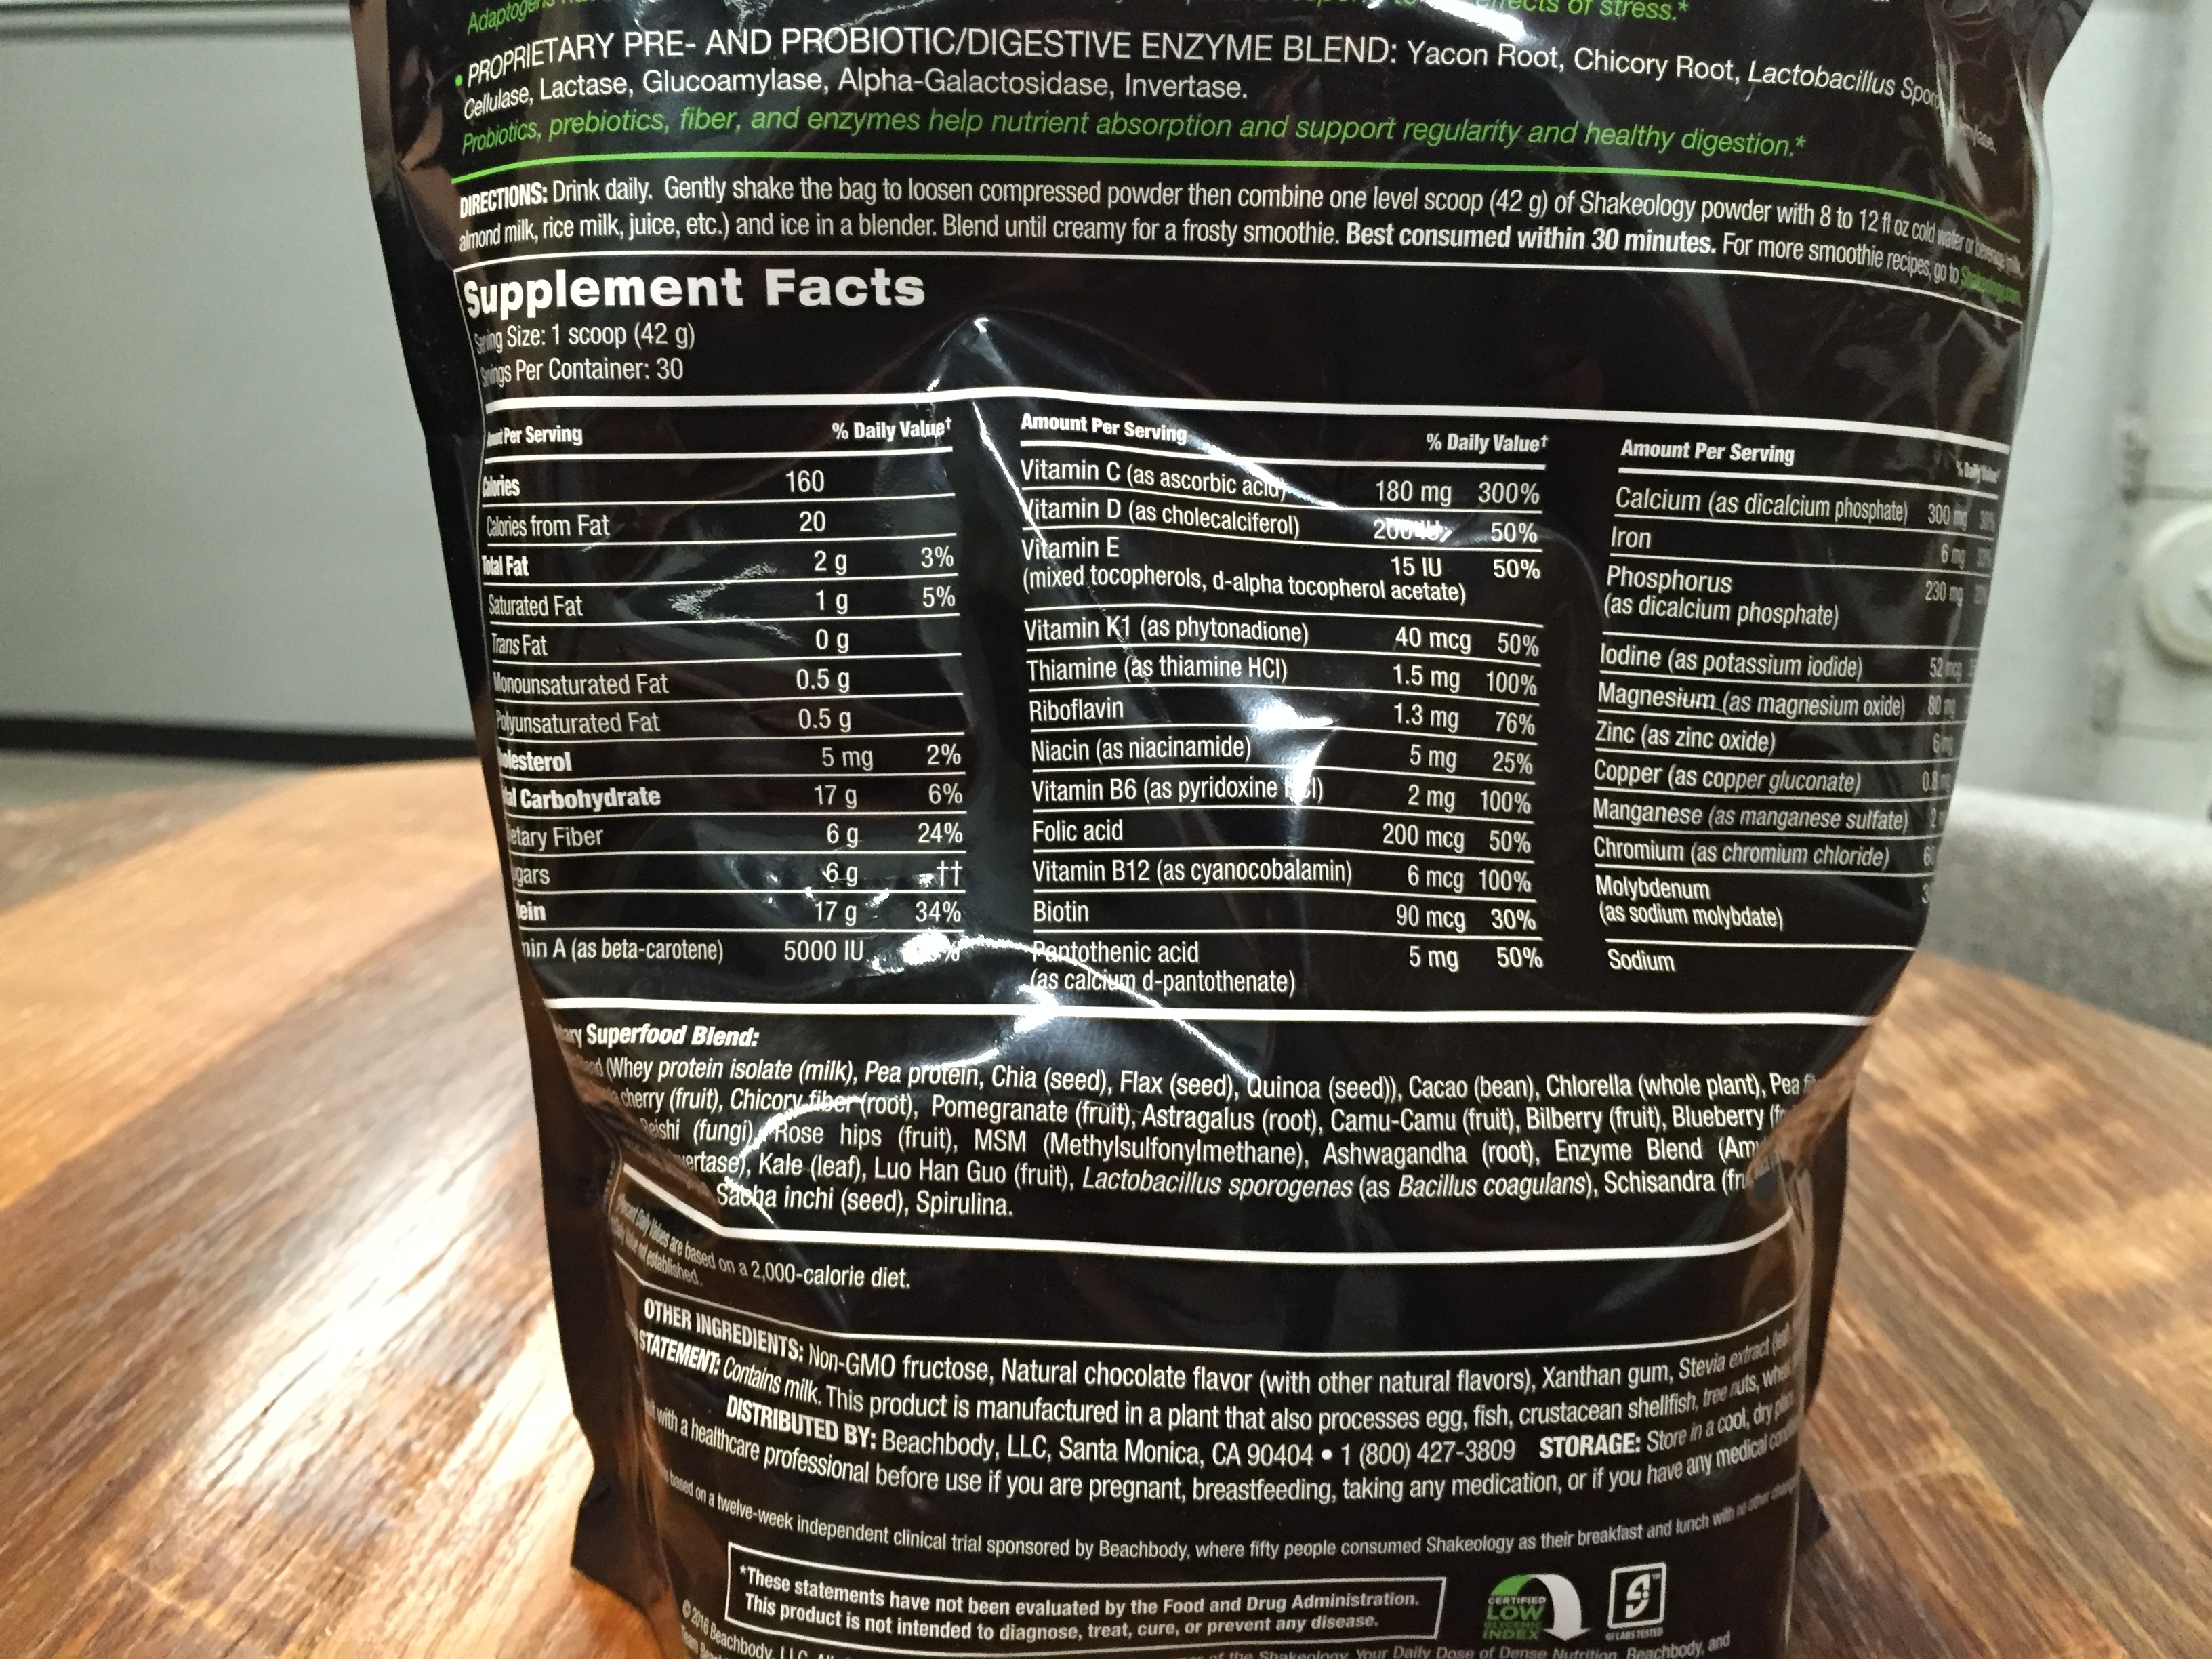 Rumored Buzz on Shakeology: Ingredients, Beachbody, Recipes, Flavours - Factdr